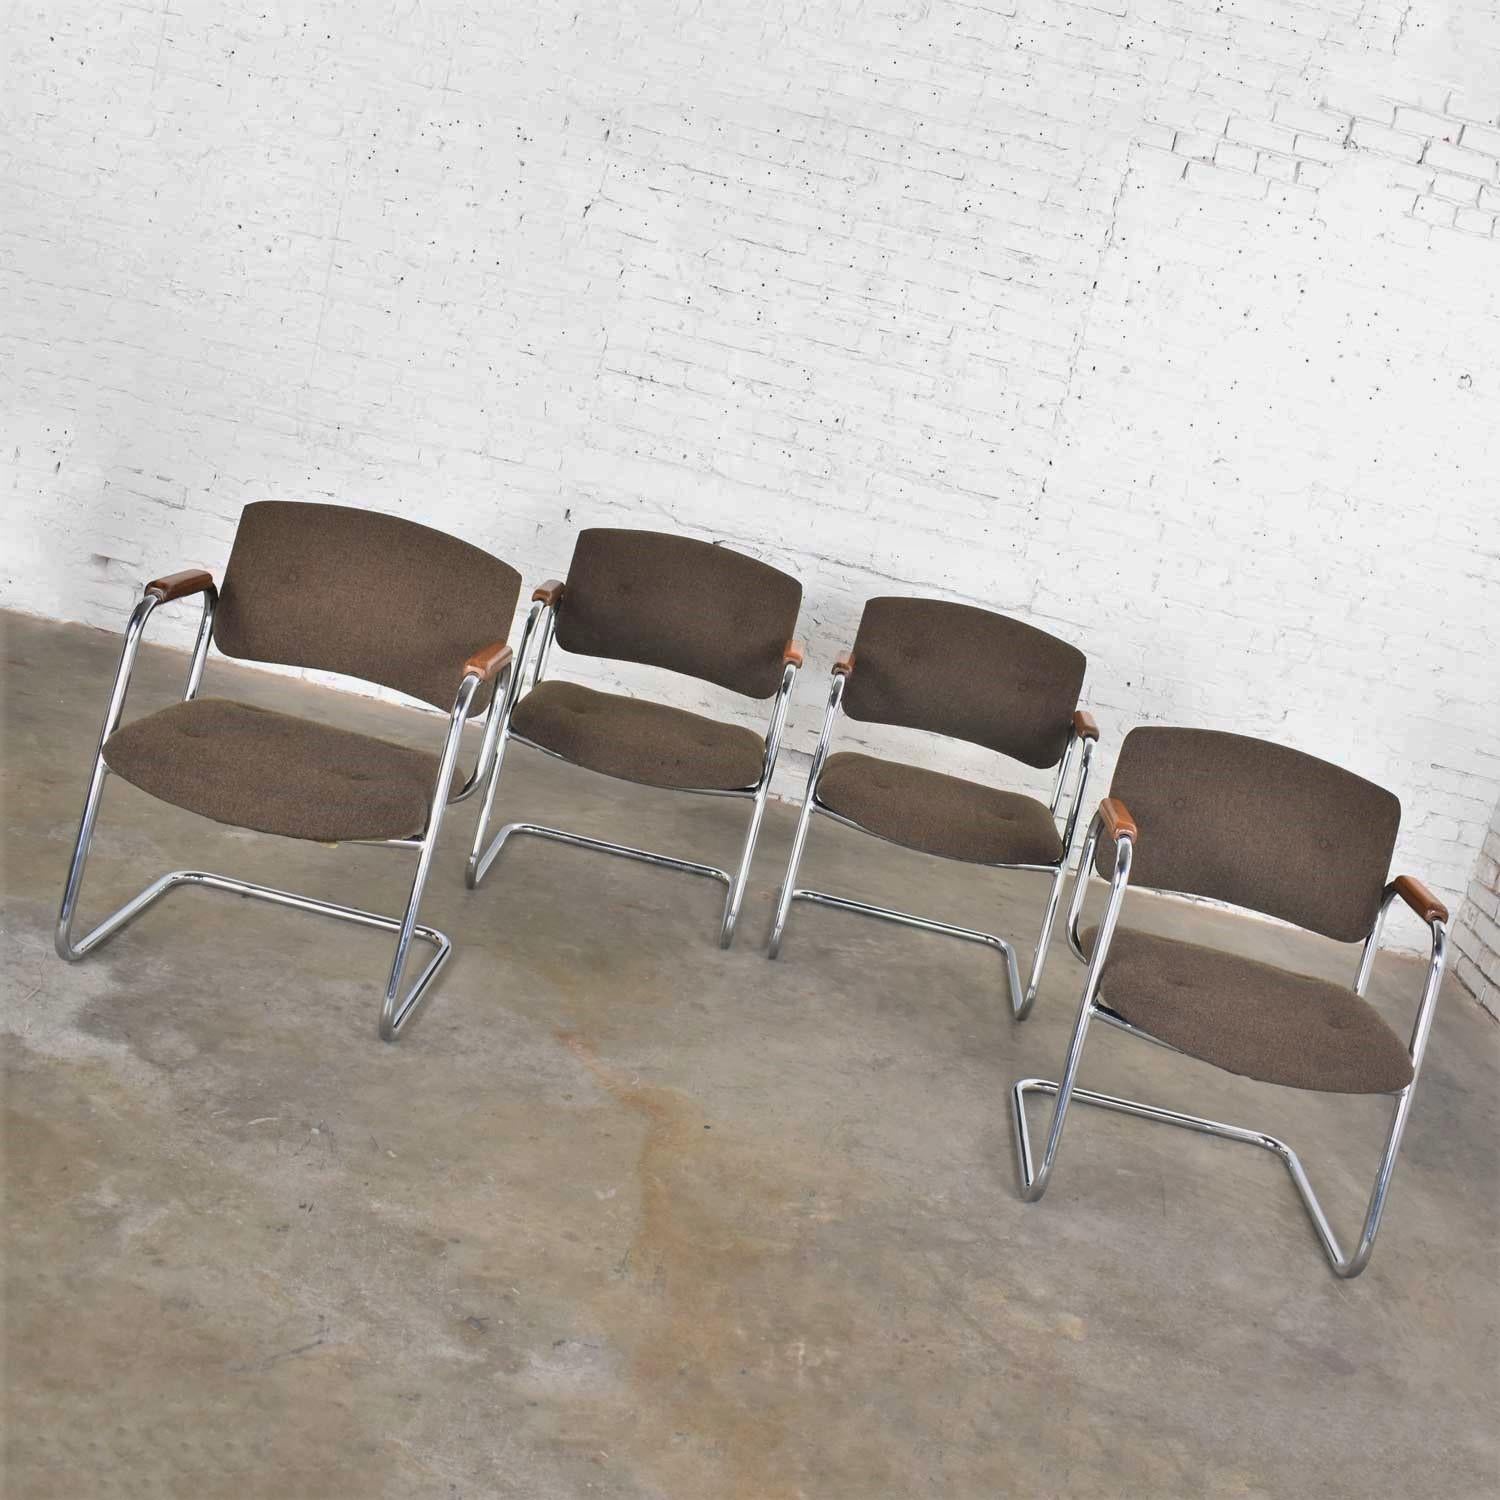 4 Cantilever Armchairs Chrome Brown w/ Wood Arms Style of Steelcase or Pollock 1